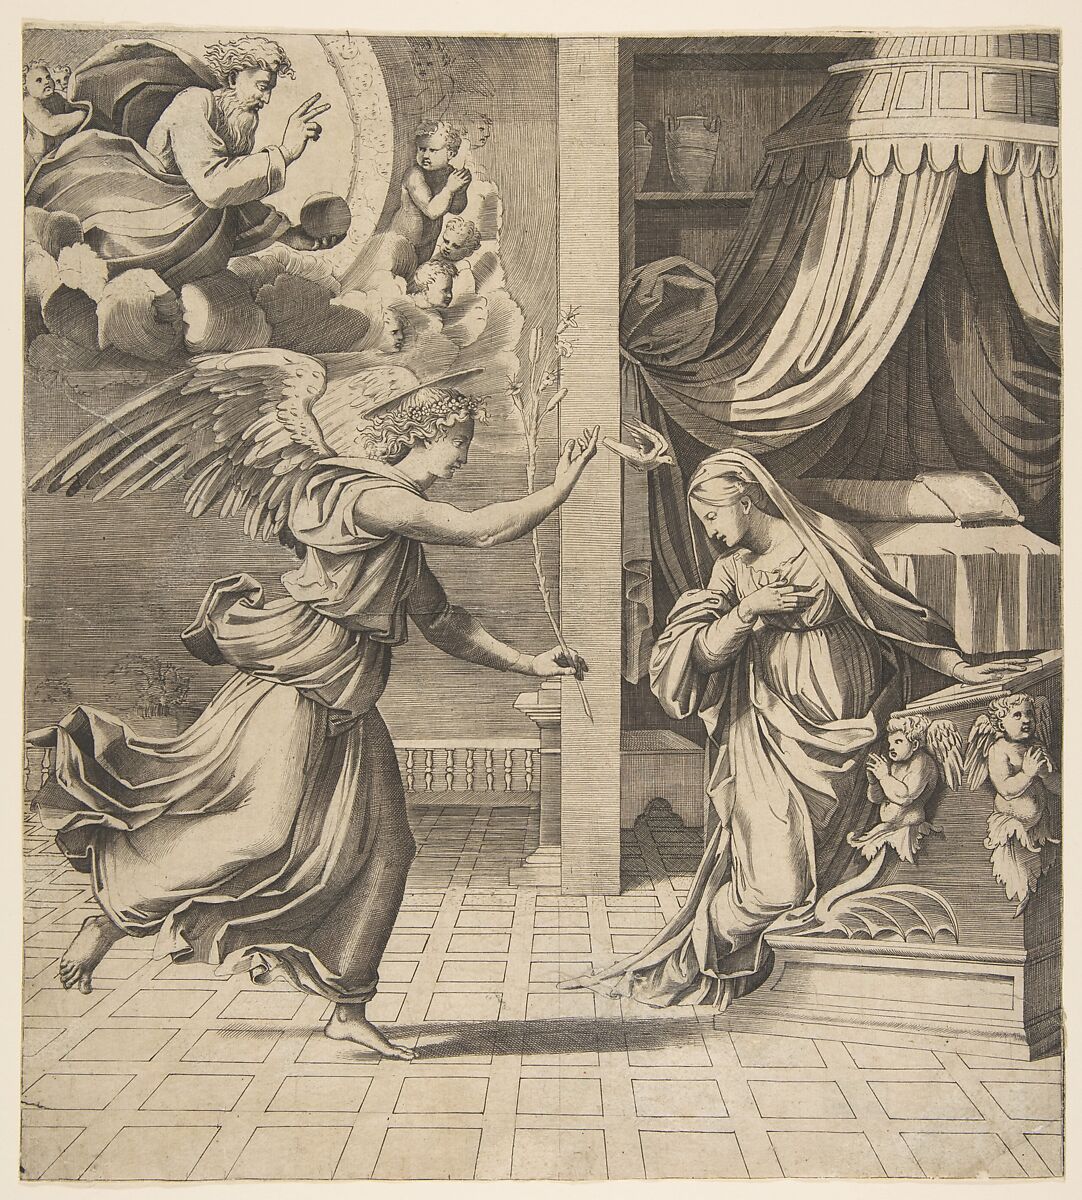 The Annunciation; the archangel Gabriel at left approaching the Virgin kneeling in prayer at right, God the Father in the upper left, Attributed to Marco Dente (Italian, Ravenna, active by 1515–died 1527 Rome), Engraving 